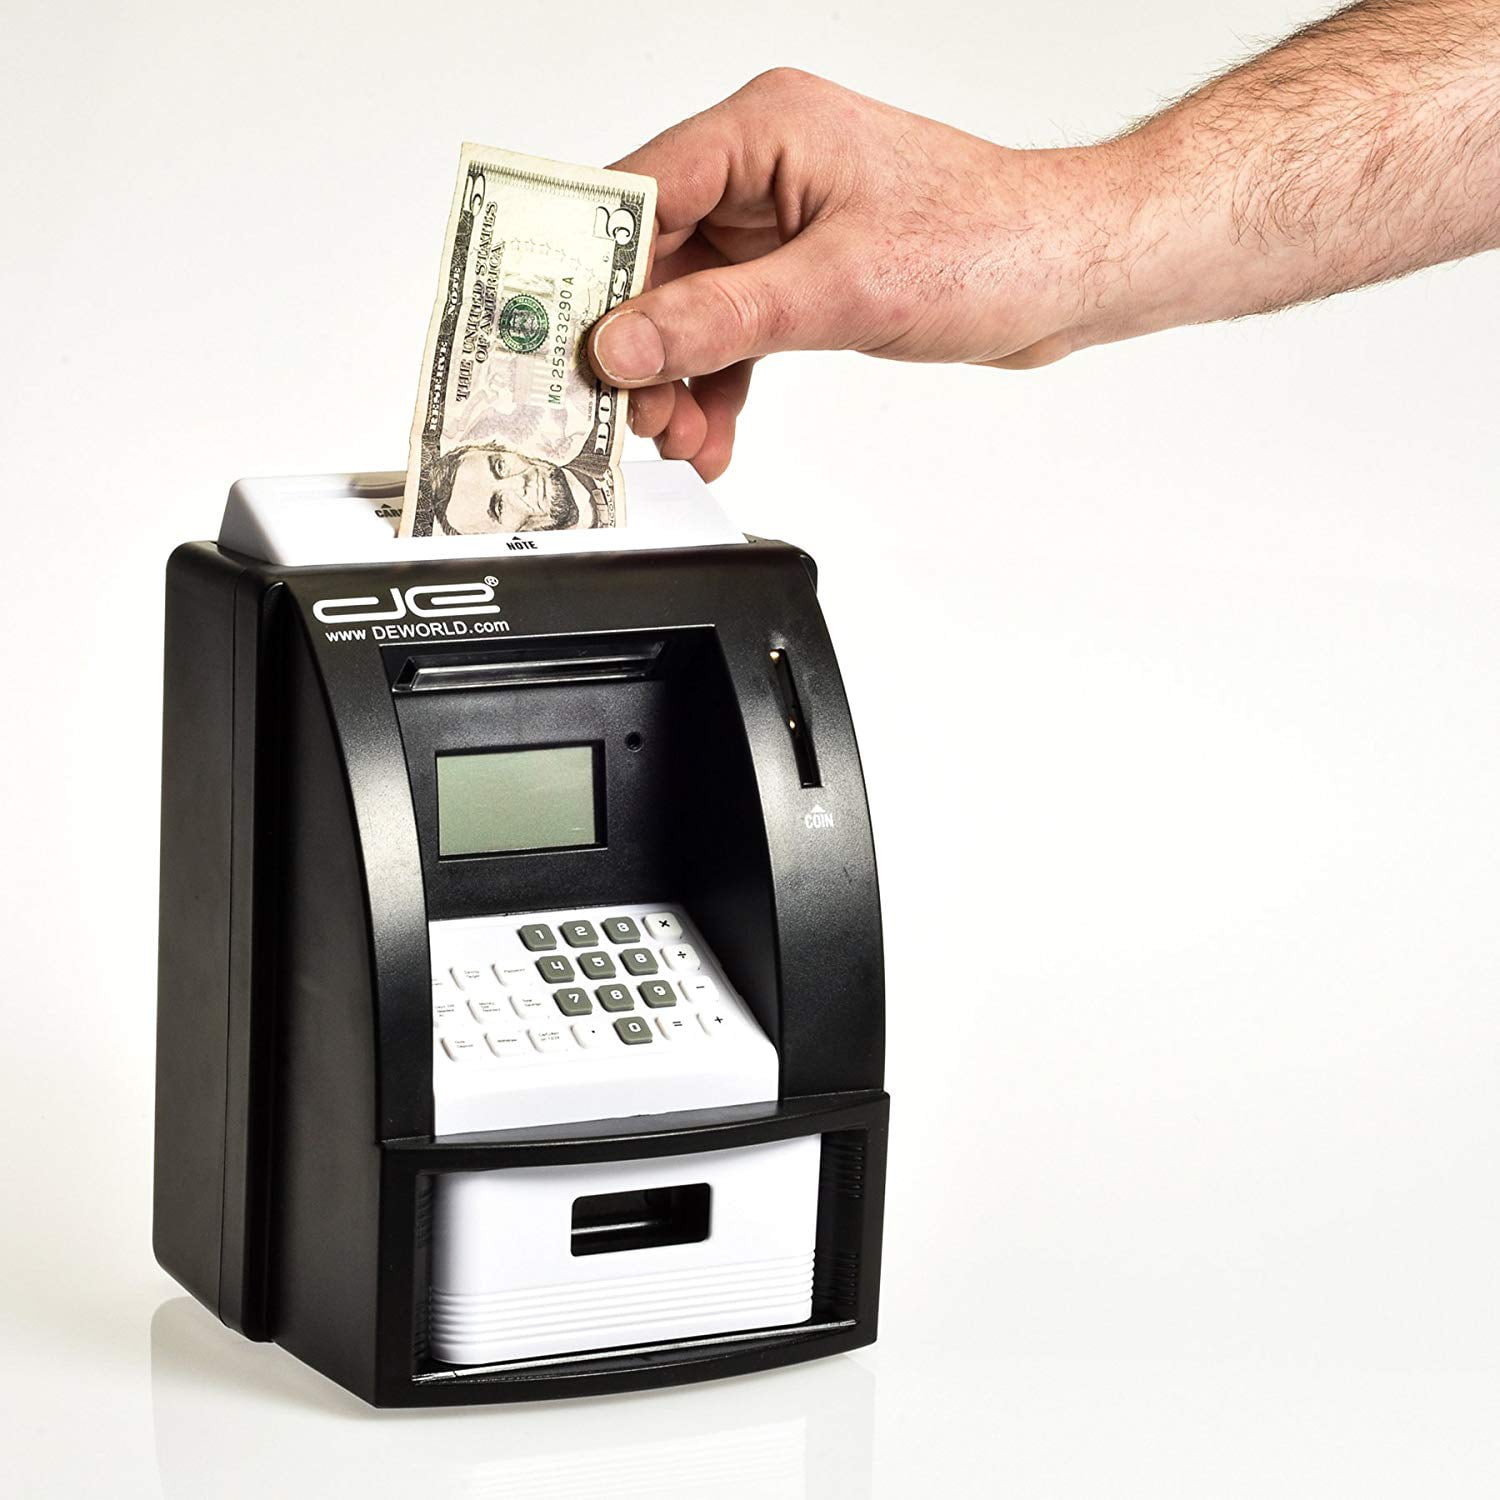 Automatic Coin Counter with Bill Slot by Mini ATM Machine Piggy Bank for Kids